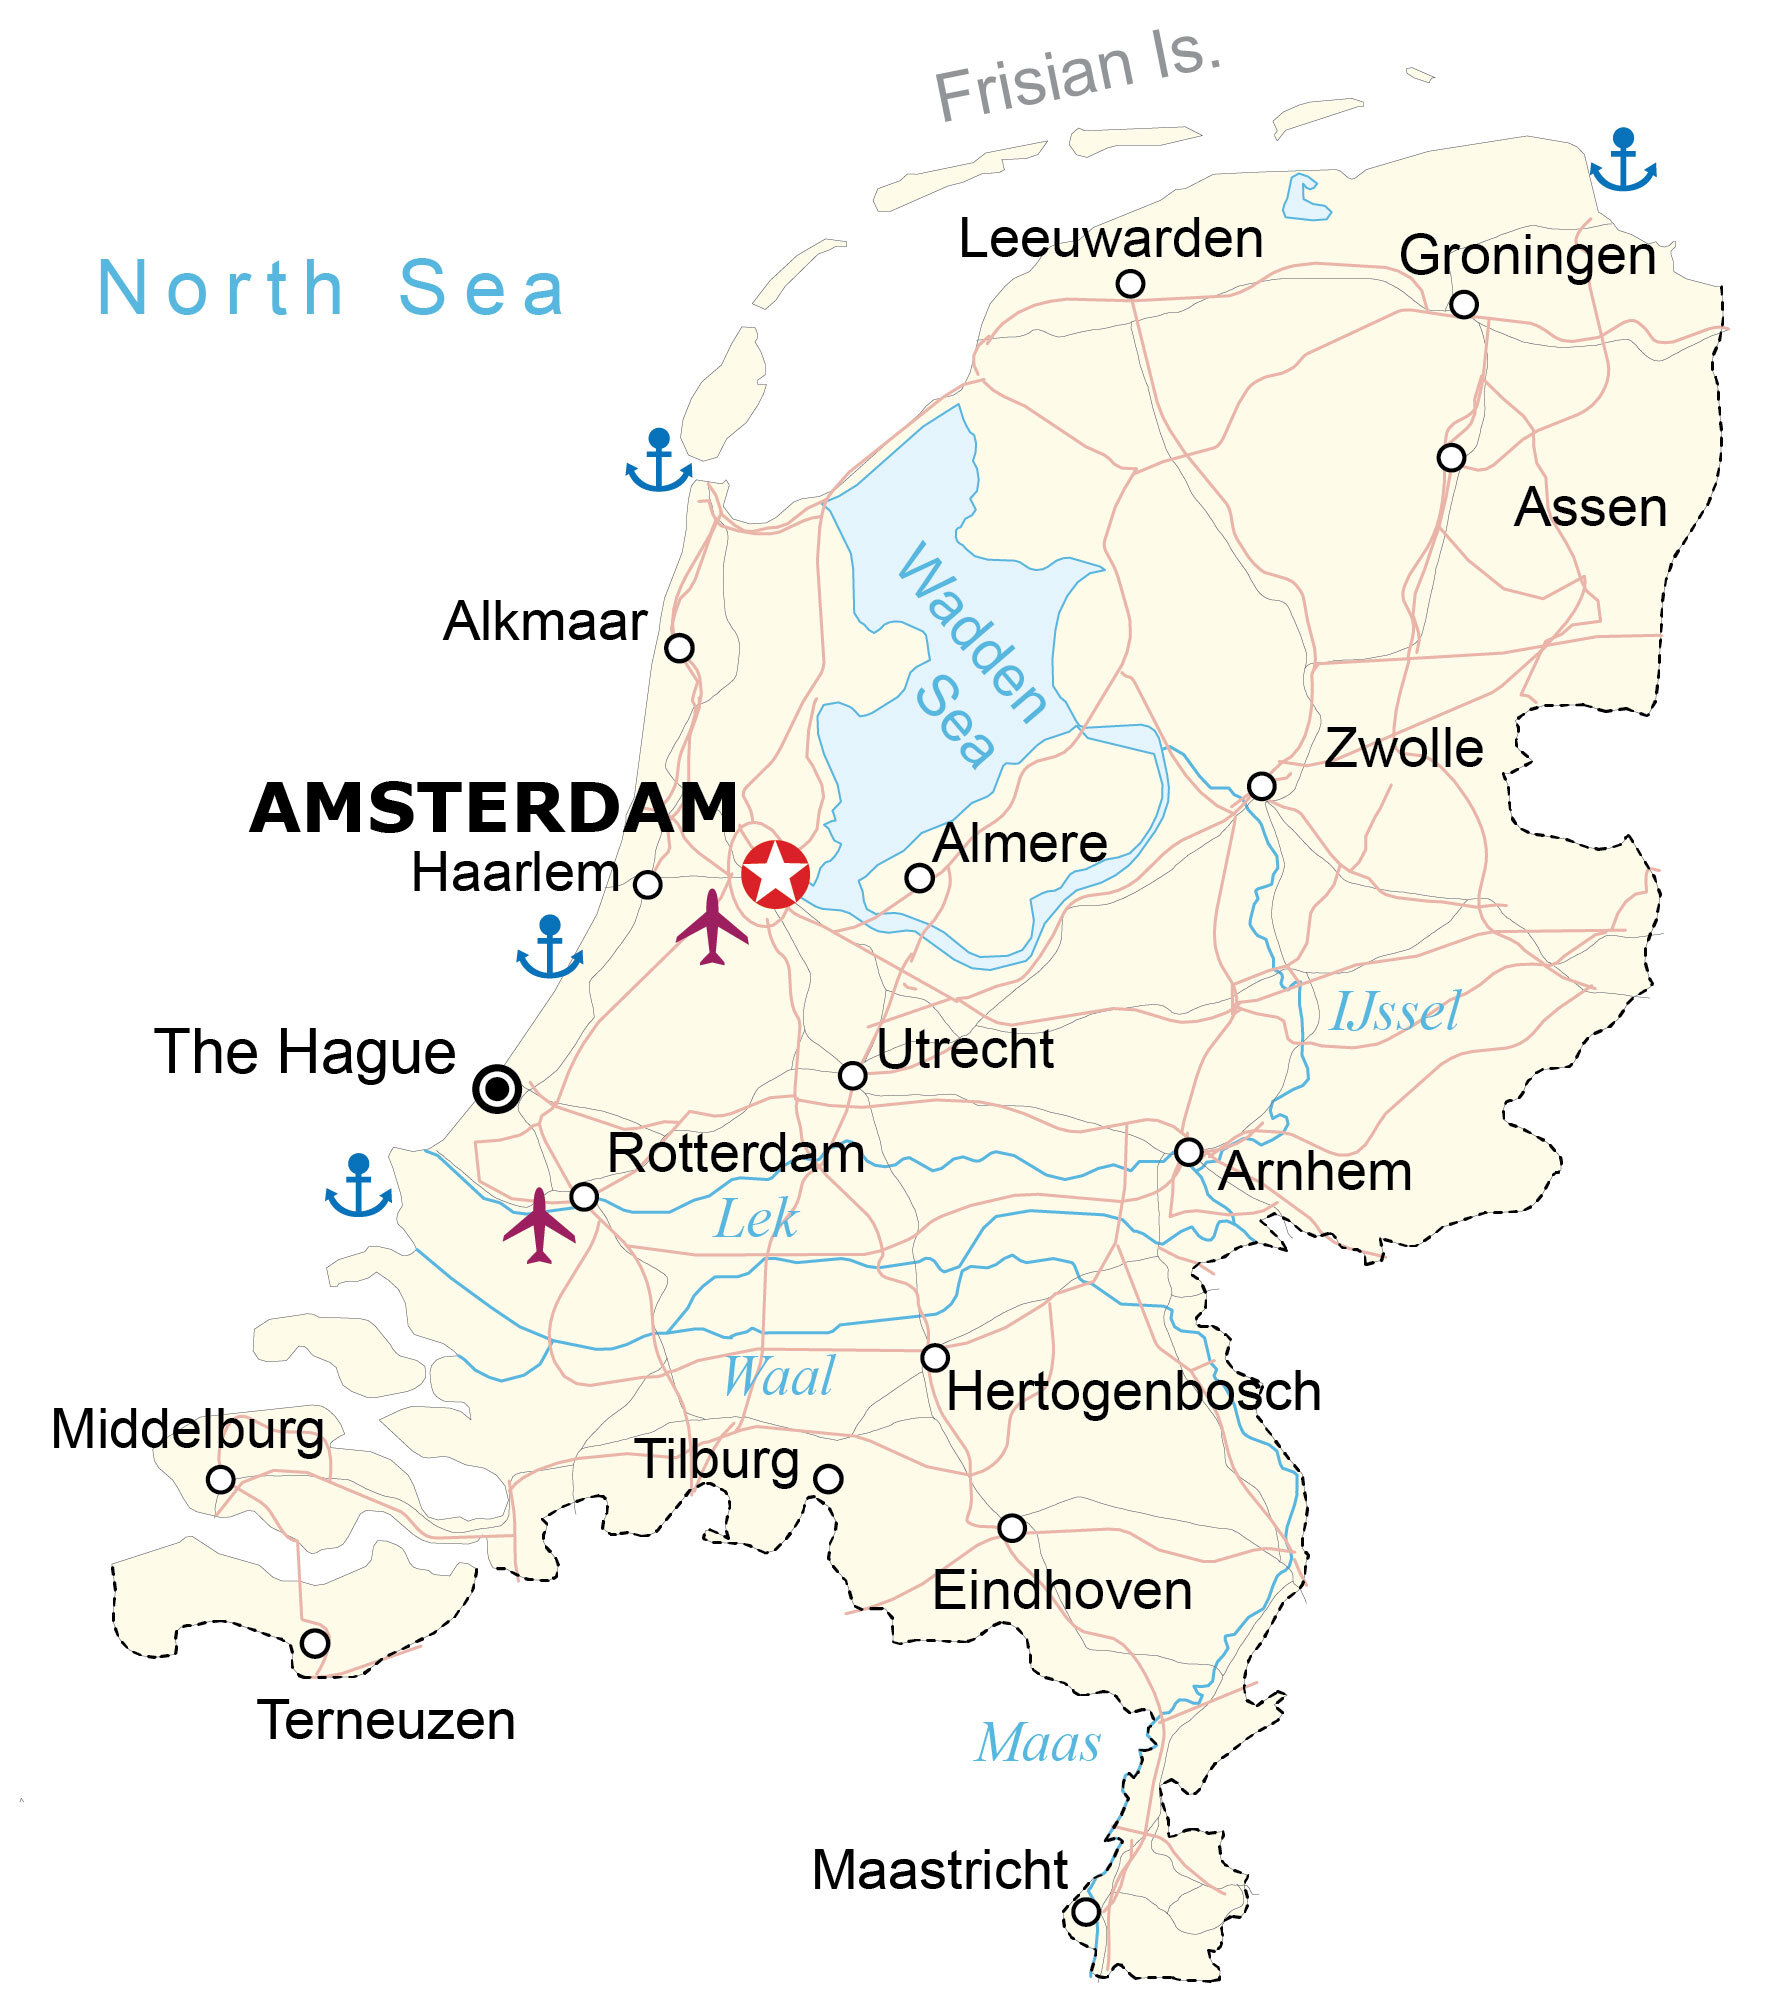 Netherlands Physical Features Map